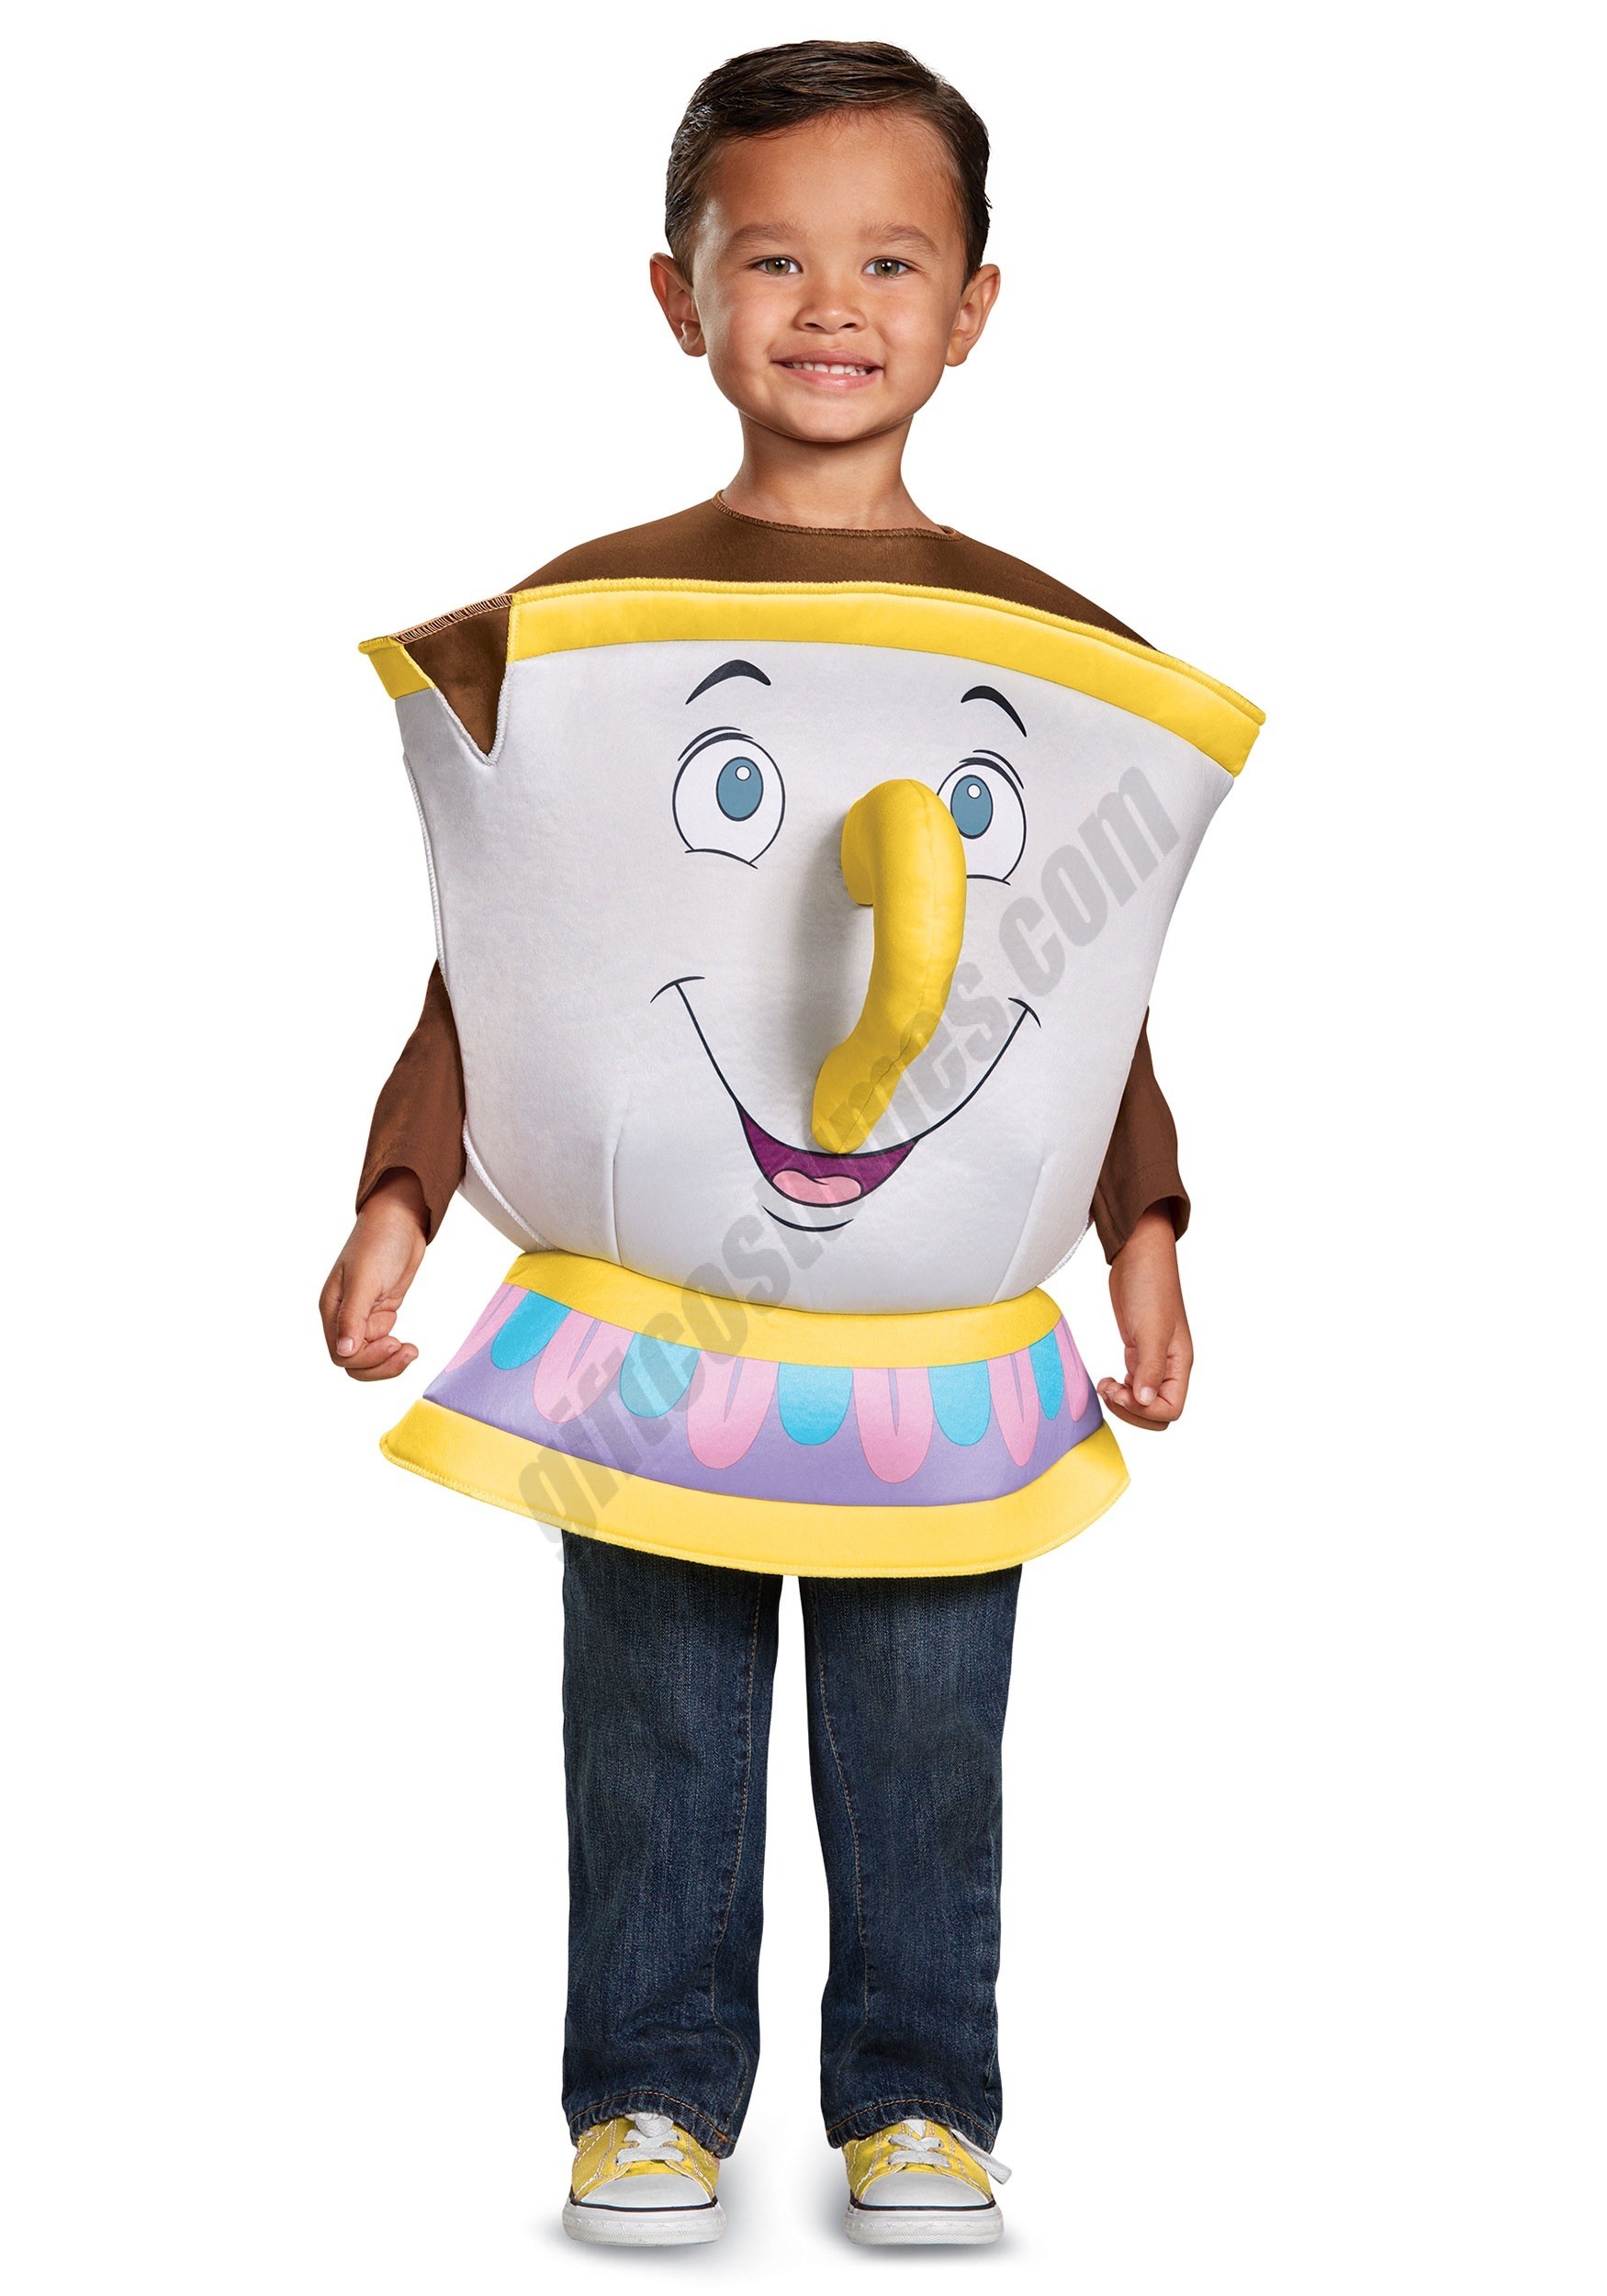 Deluxe Chip Costume for Toddlers Promotions - Deluxe Chip Costume for Toddlers Promotions